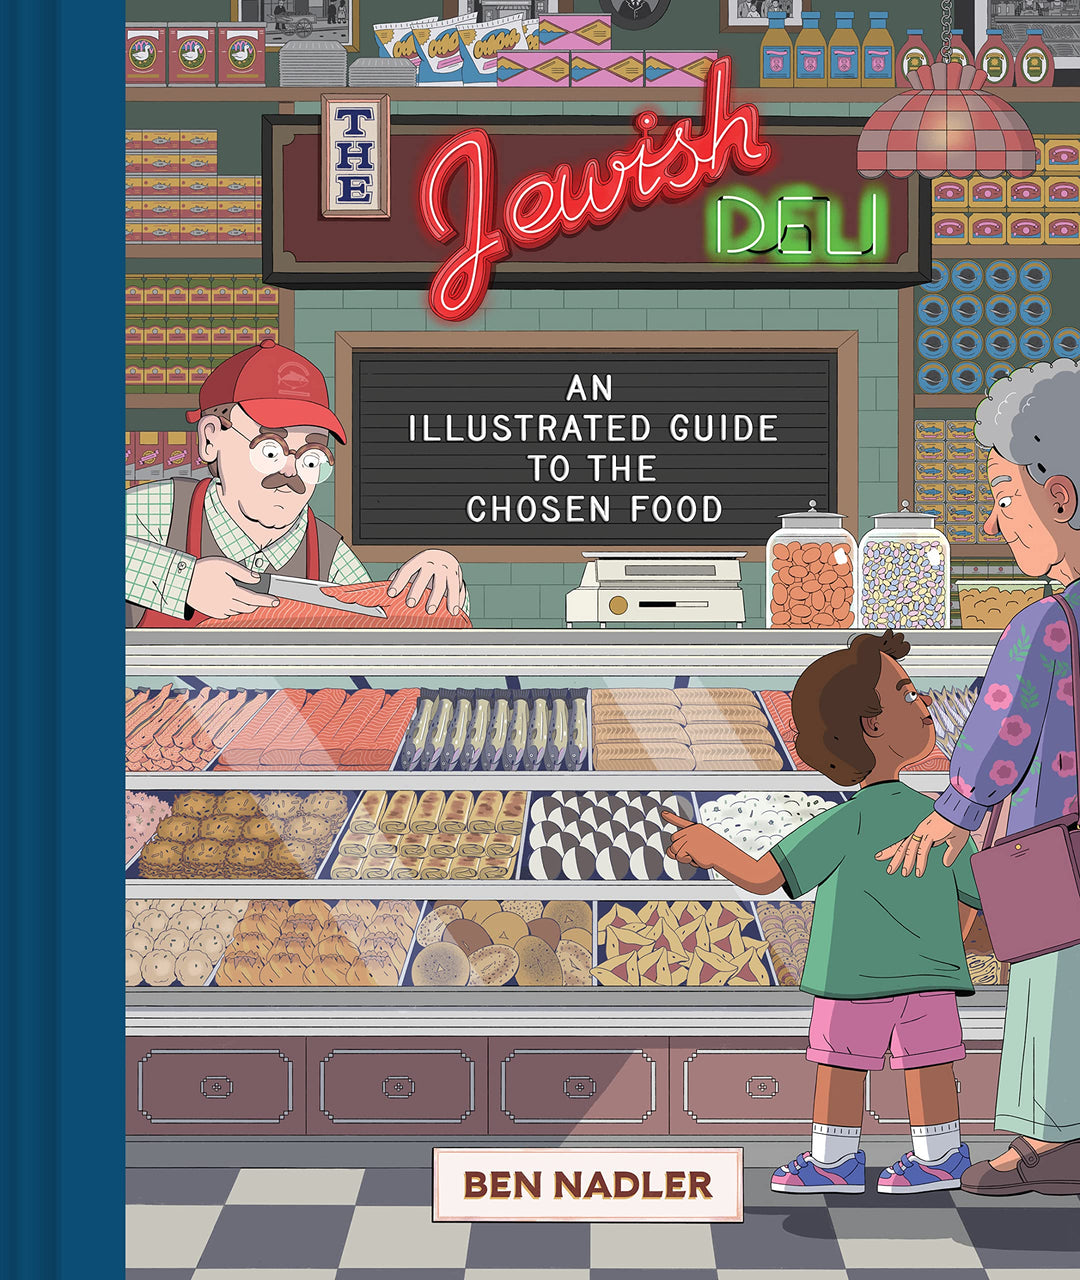 The Jewish Deli: An Illustrated Guide to the Chosen Food